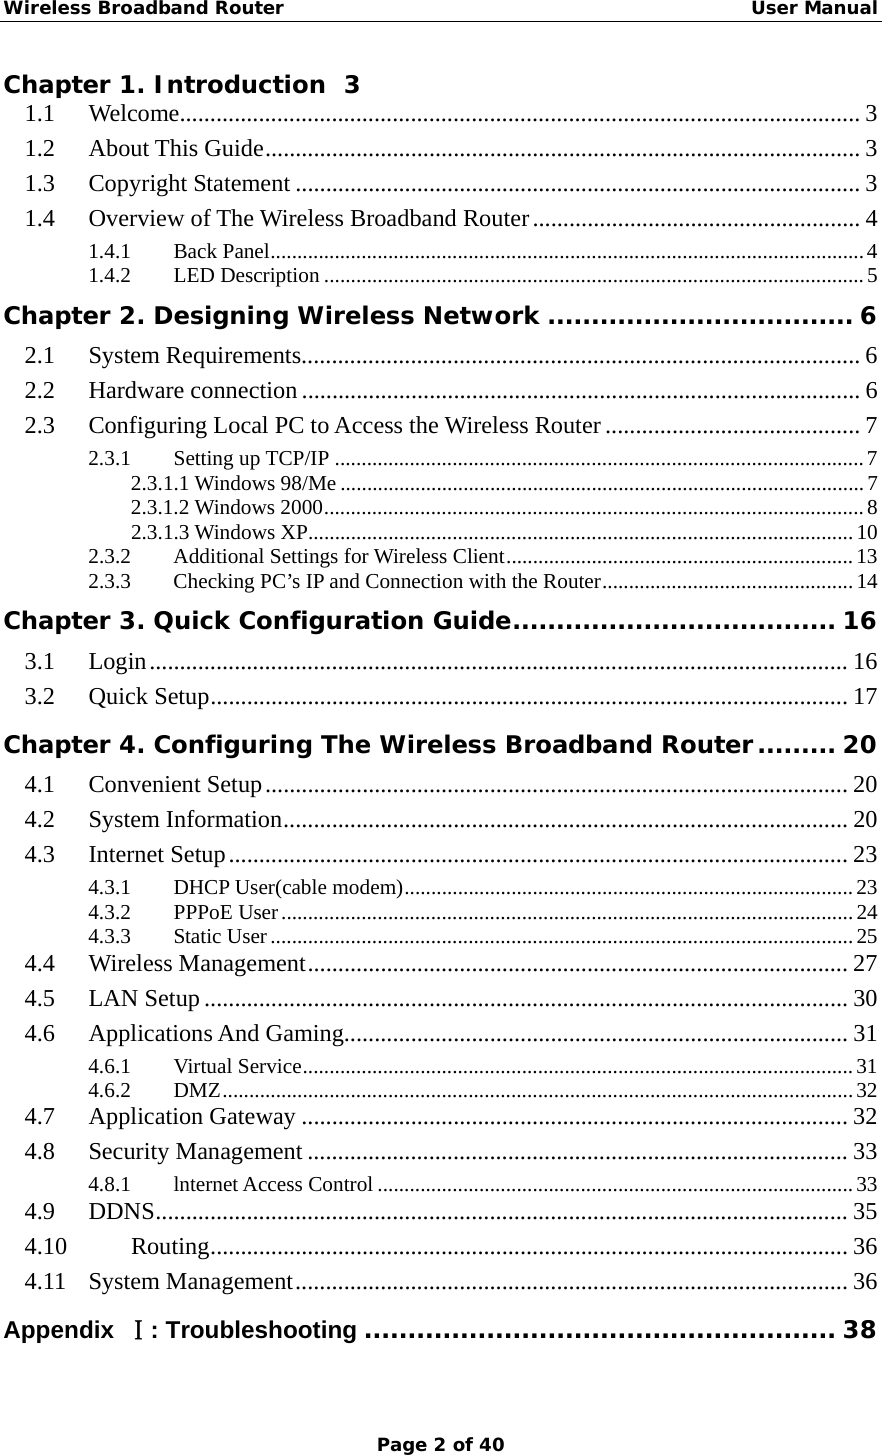 Wireless Broadband Router                                                   User Manual Page 2 of 40 Chapter 1. Introduction  3 1.1 Welcome................................................................................................................ 3 1.2 About This Guide.................................................................................................. 3 1.3 Copyright Statement ............................................................................................. 3 1.4 Overview of The Wireless Broadband Router...................................................... 4 1.4.1 Back Panel...............................................................................................................4 1.4.2 LED Description .....................................................................................................5 Chapter 2. Designing Wireless Network ................................... 6 2.1 System Requirements............................................................................................ 6 2.2 Hardware connection ............................................................................................ 6 2.3 Configuring Local PC to Access the Wireless Router .......................................... 7 2.3.1 Setting up TCP/IP ...................................................................................................7 2.3.1.1 Windows 98/Me ..................................................................................................7 2.3.1.2 Windows 2000.....................................................................................................8 2.3.1.3 Windows XP......................................................................................................10 2.3.2  Additional Settings for Wireless Client.................................................................13 2.3.3  Checking PC’s IP and Connection with the Router...............................................14 Chapter 3. Quick Configuration Guide..................................... 16 3.1 Login................................................................................................................... 16 3.2 Quick Setup......................................................................................................... 17 Chapter 4. Configuring The Wireless Broadband Router......... 20 4.1 Convenient Setup................................................................................................ 20 4.2 System Information............................................................................................. 20 4.3 Internet Setup...................................................................................................... 23 4.3.1 DHCP User(cable modem)....................................................................................23 4.3.2 PPPoE User...........................................................................................................24 4.3.3 Static User.............................................................................................................25 4.4 Wireless Management......................................................................................... 27 4.5 LAN Setup.......................................................................................................... 30 4.6 Applications And Gaming................................................................................... 31 4.6.1 Virtual Service.......................................................................................................31 4.6.2 DMZ......................................................................................................................32 4.7 Application Gateway .......................................................................................... 32 4.8 Security Management ......................................................................................... 33 4.8.1 lnternet Access Control .........................................................................................33 4.9 DDNS.................................................................................................................. 35 4.10 Routing......................................................................................................... 36 4.11 System Management........................................................................................... 36 Appendix  Ⅰ: Troubleshooting ...................................................... 38  